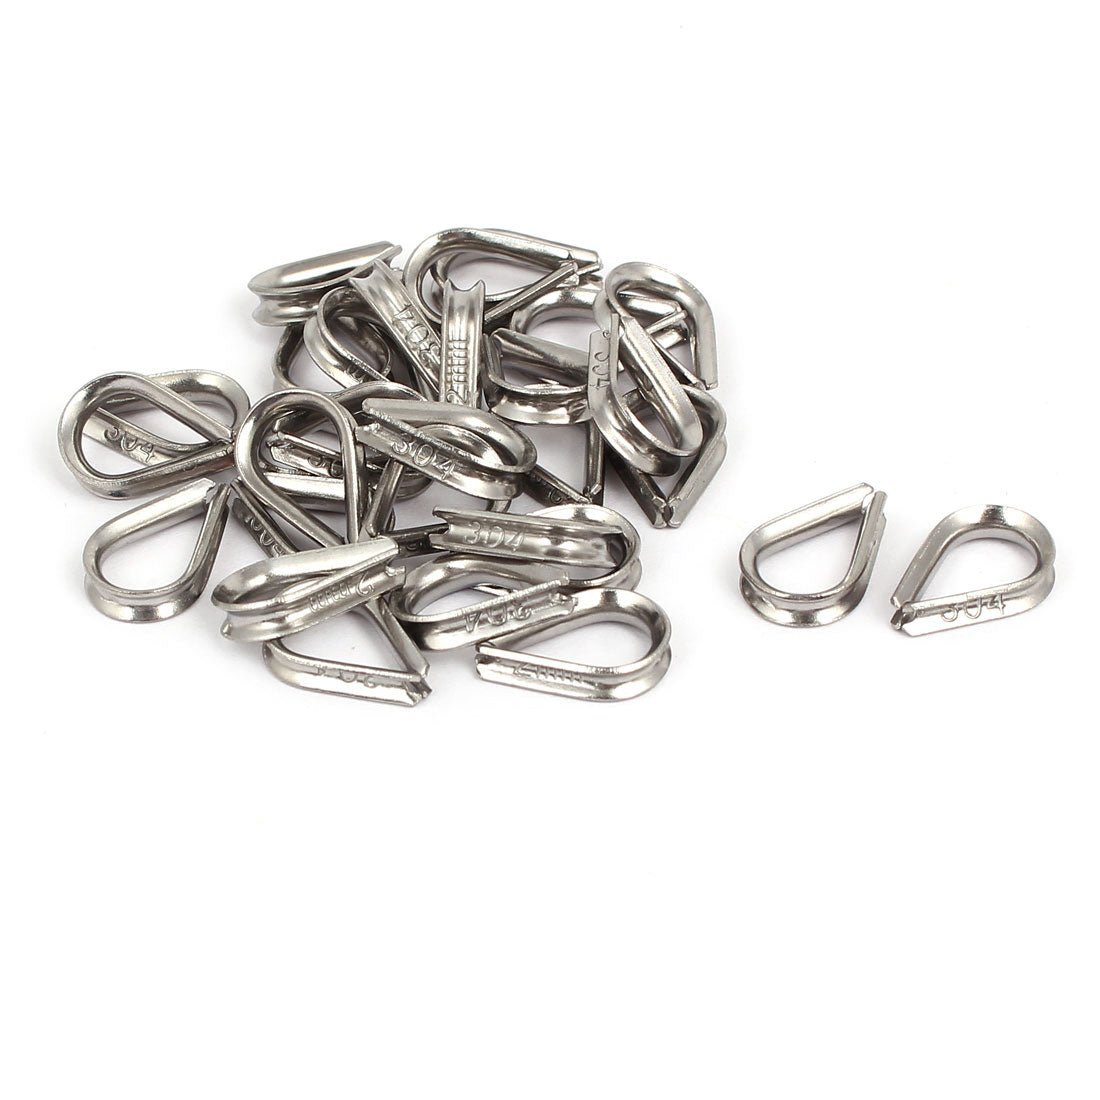 uxcell Uxcell 2mm Standard 304 Stainless Steel Wire Rope Cable Thimble Rigging Tool 30pcs